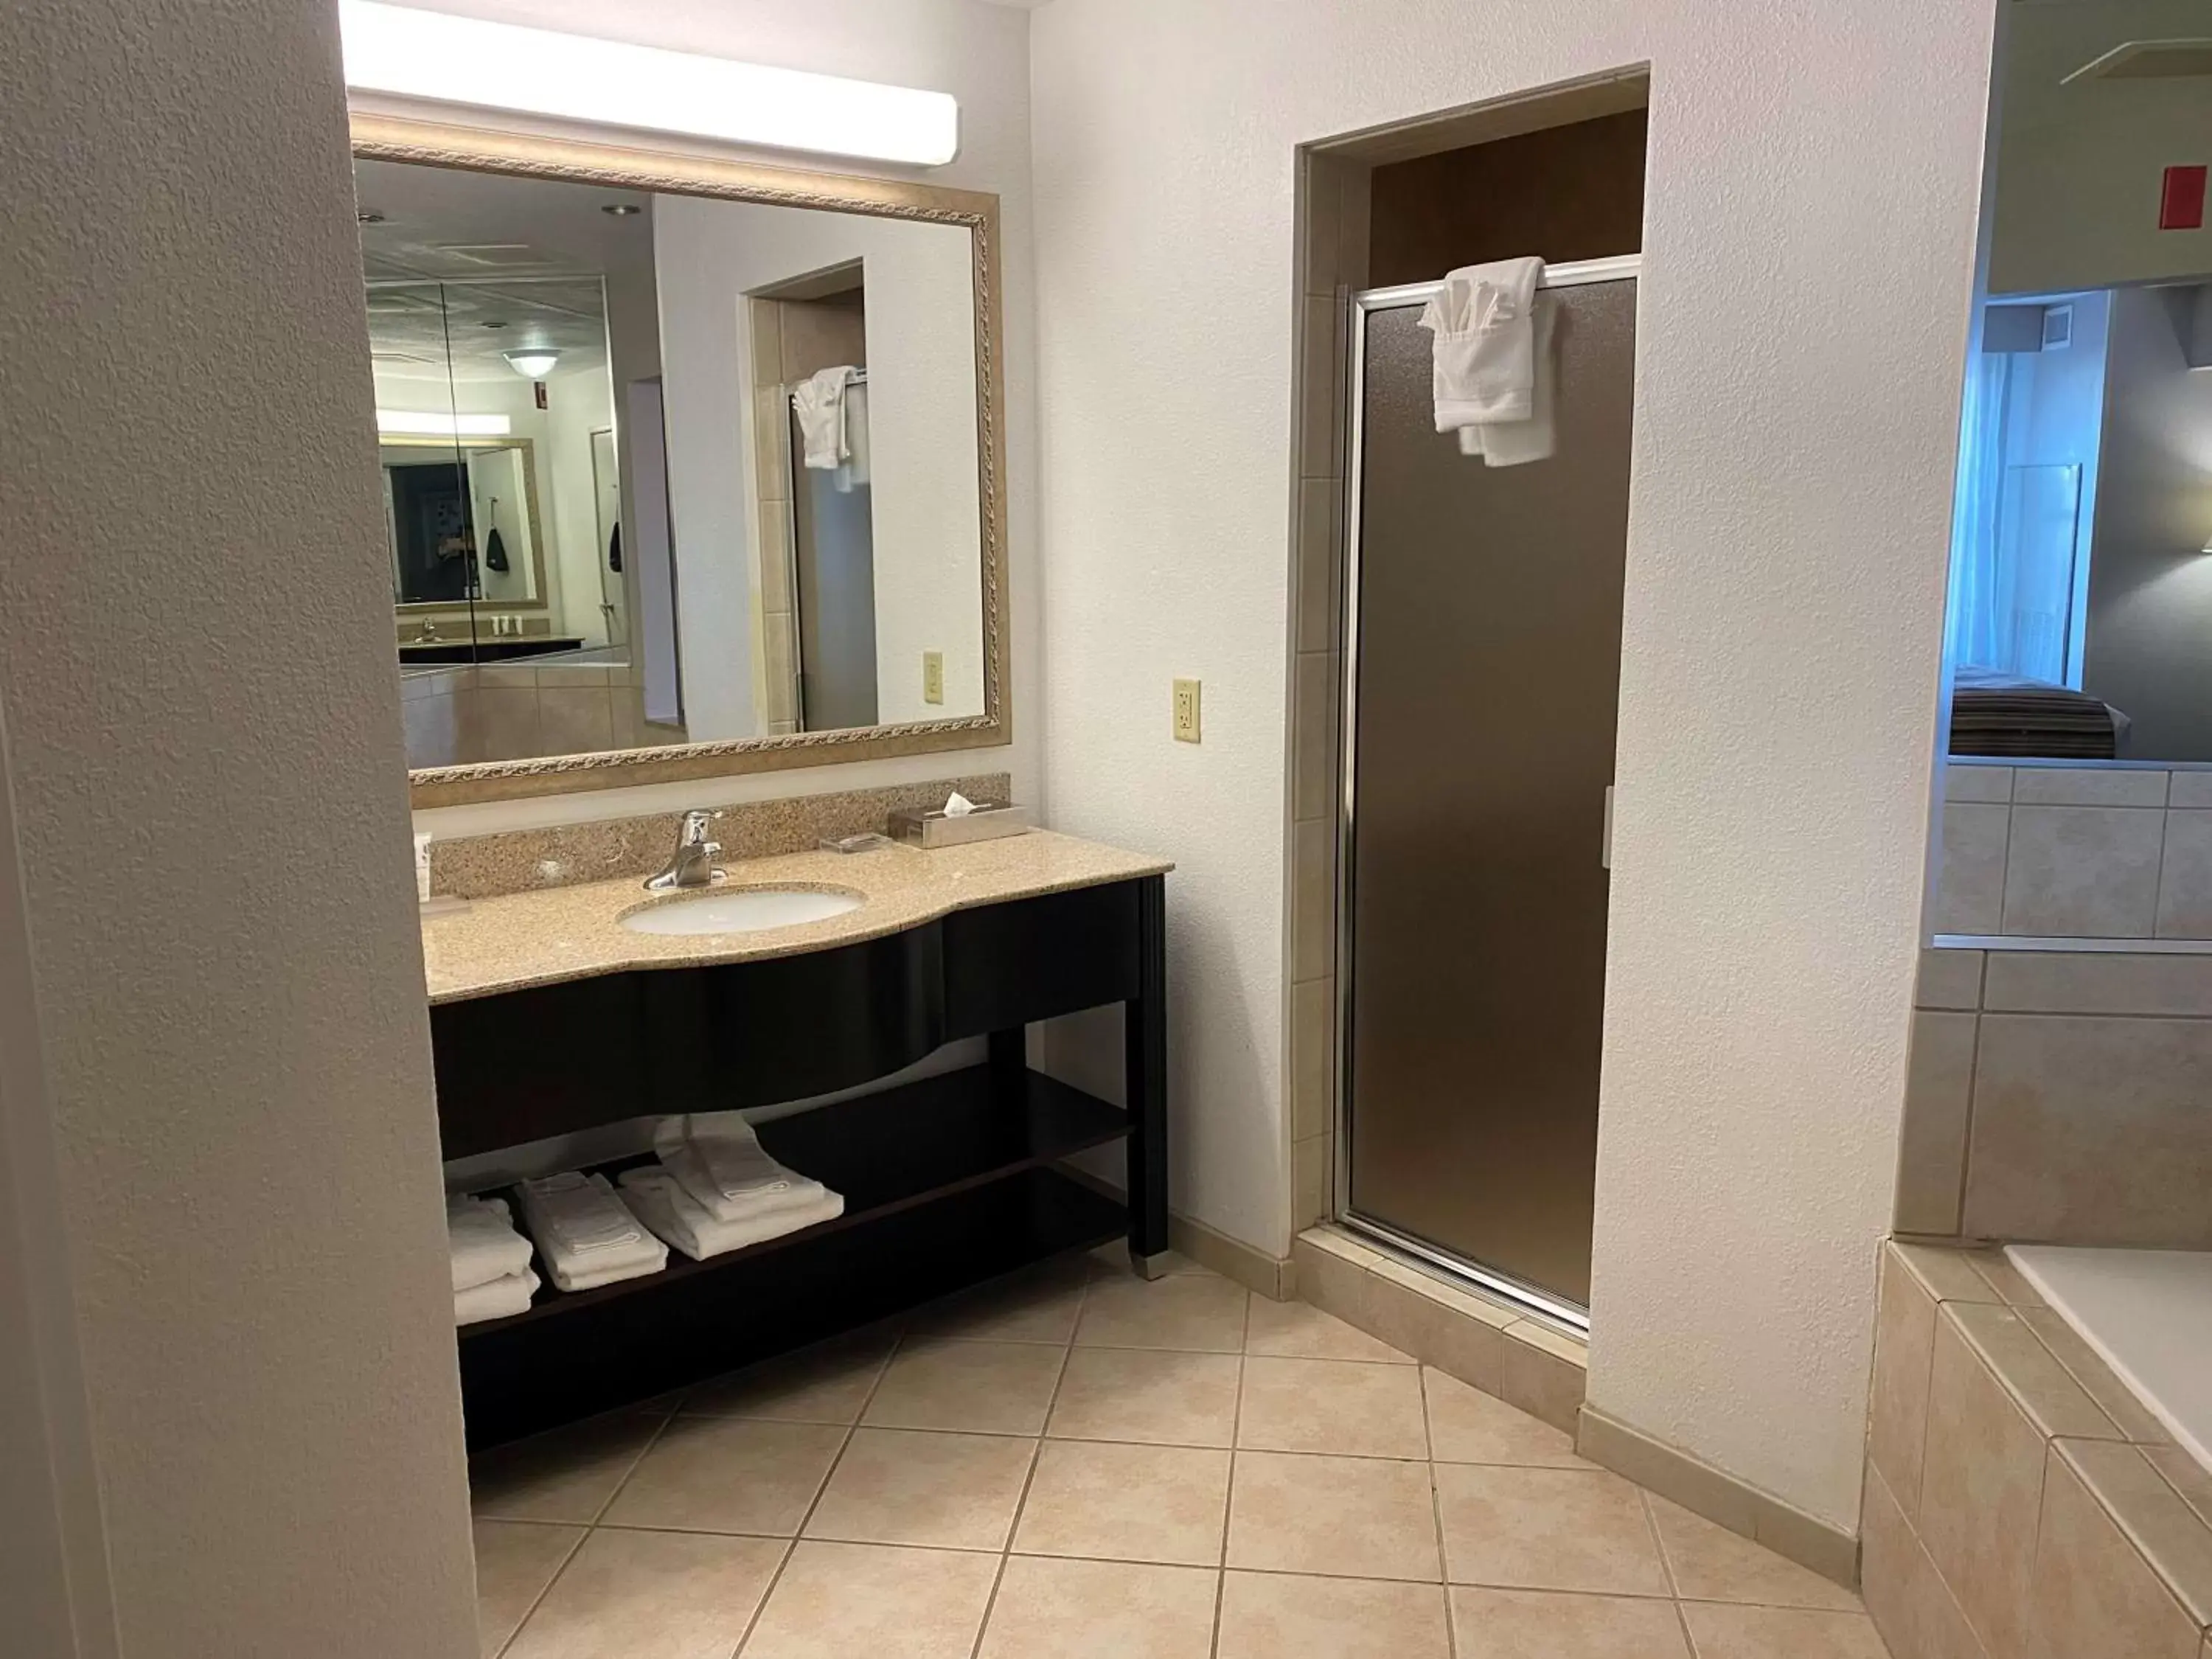 Bathroom in Country Inn & Suites by Radisson, Athens, GA